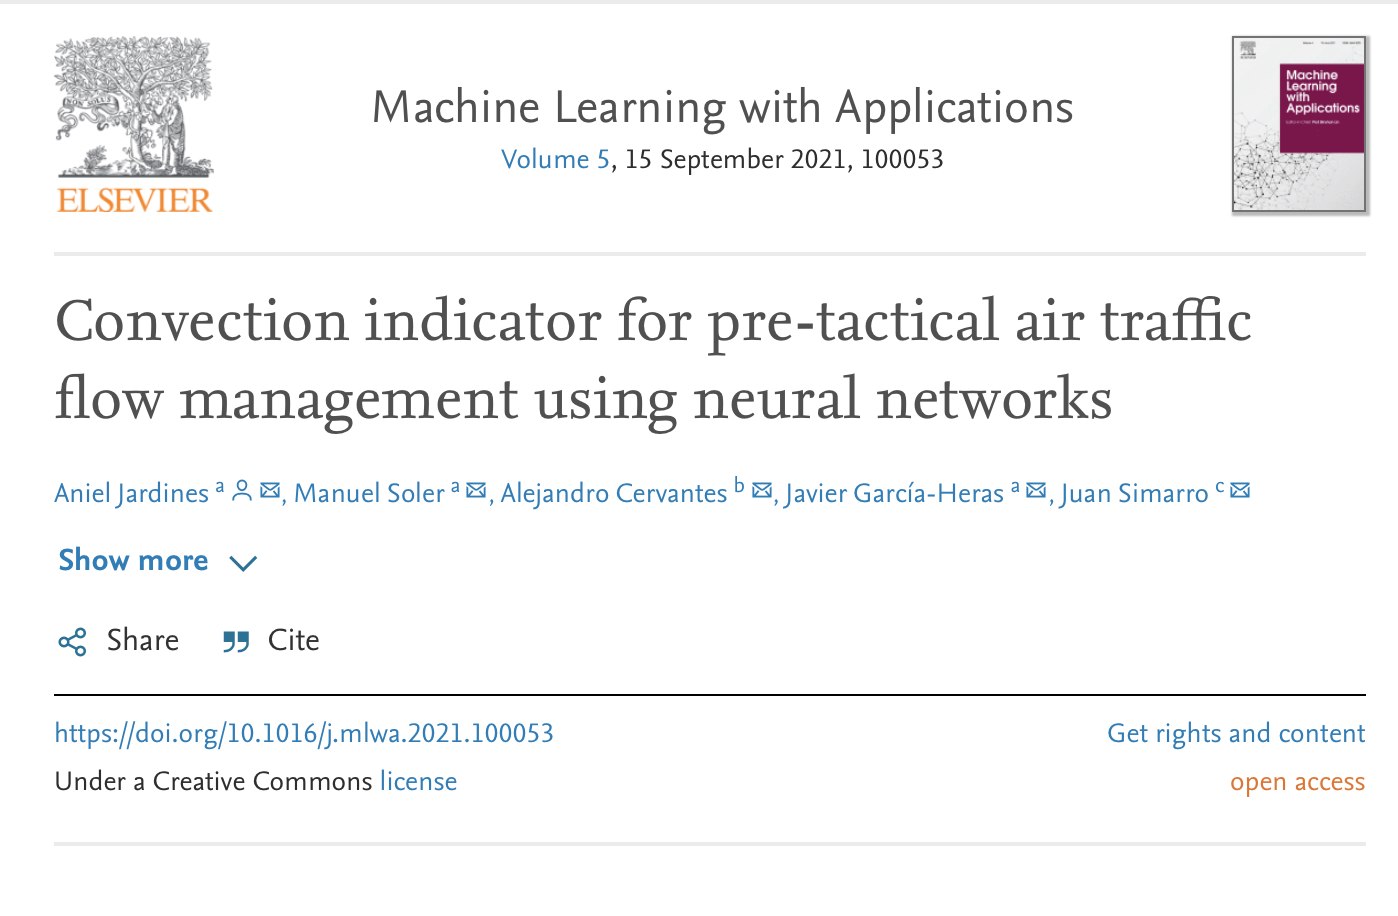 New publication on Machine Learning with Applications